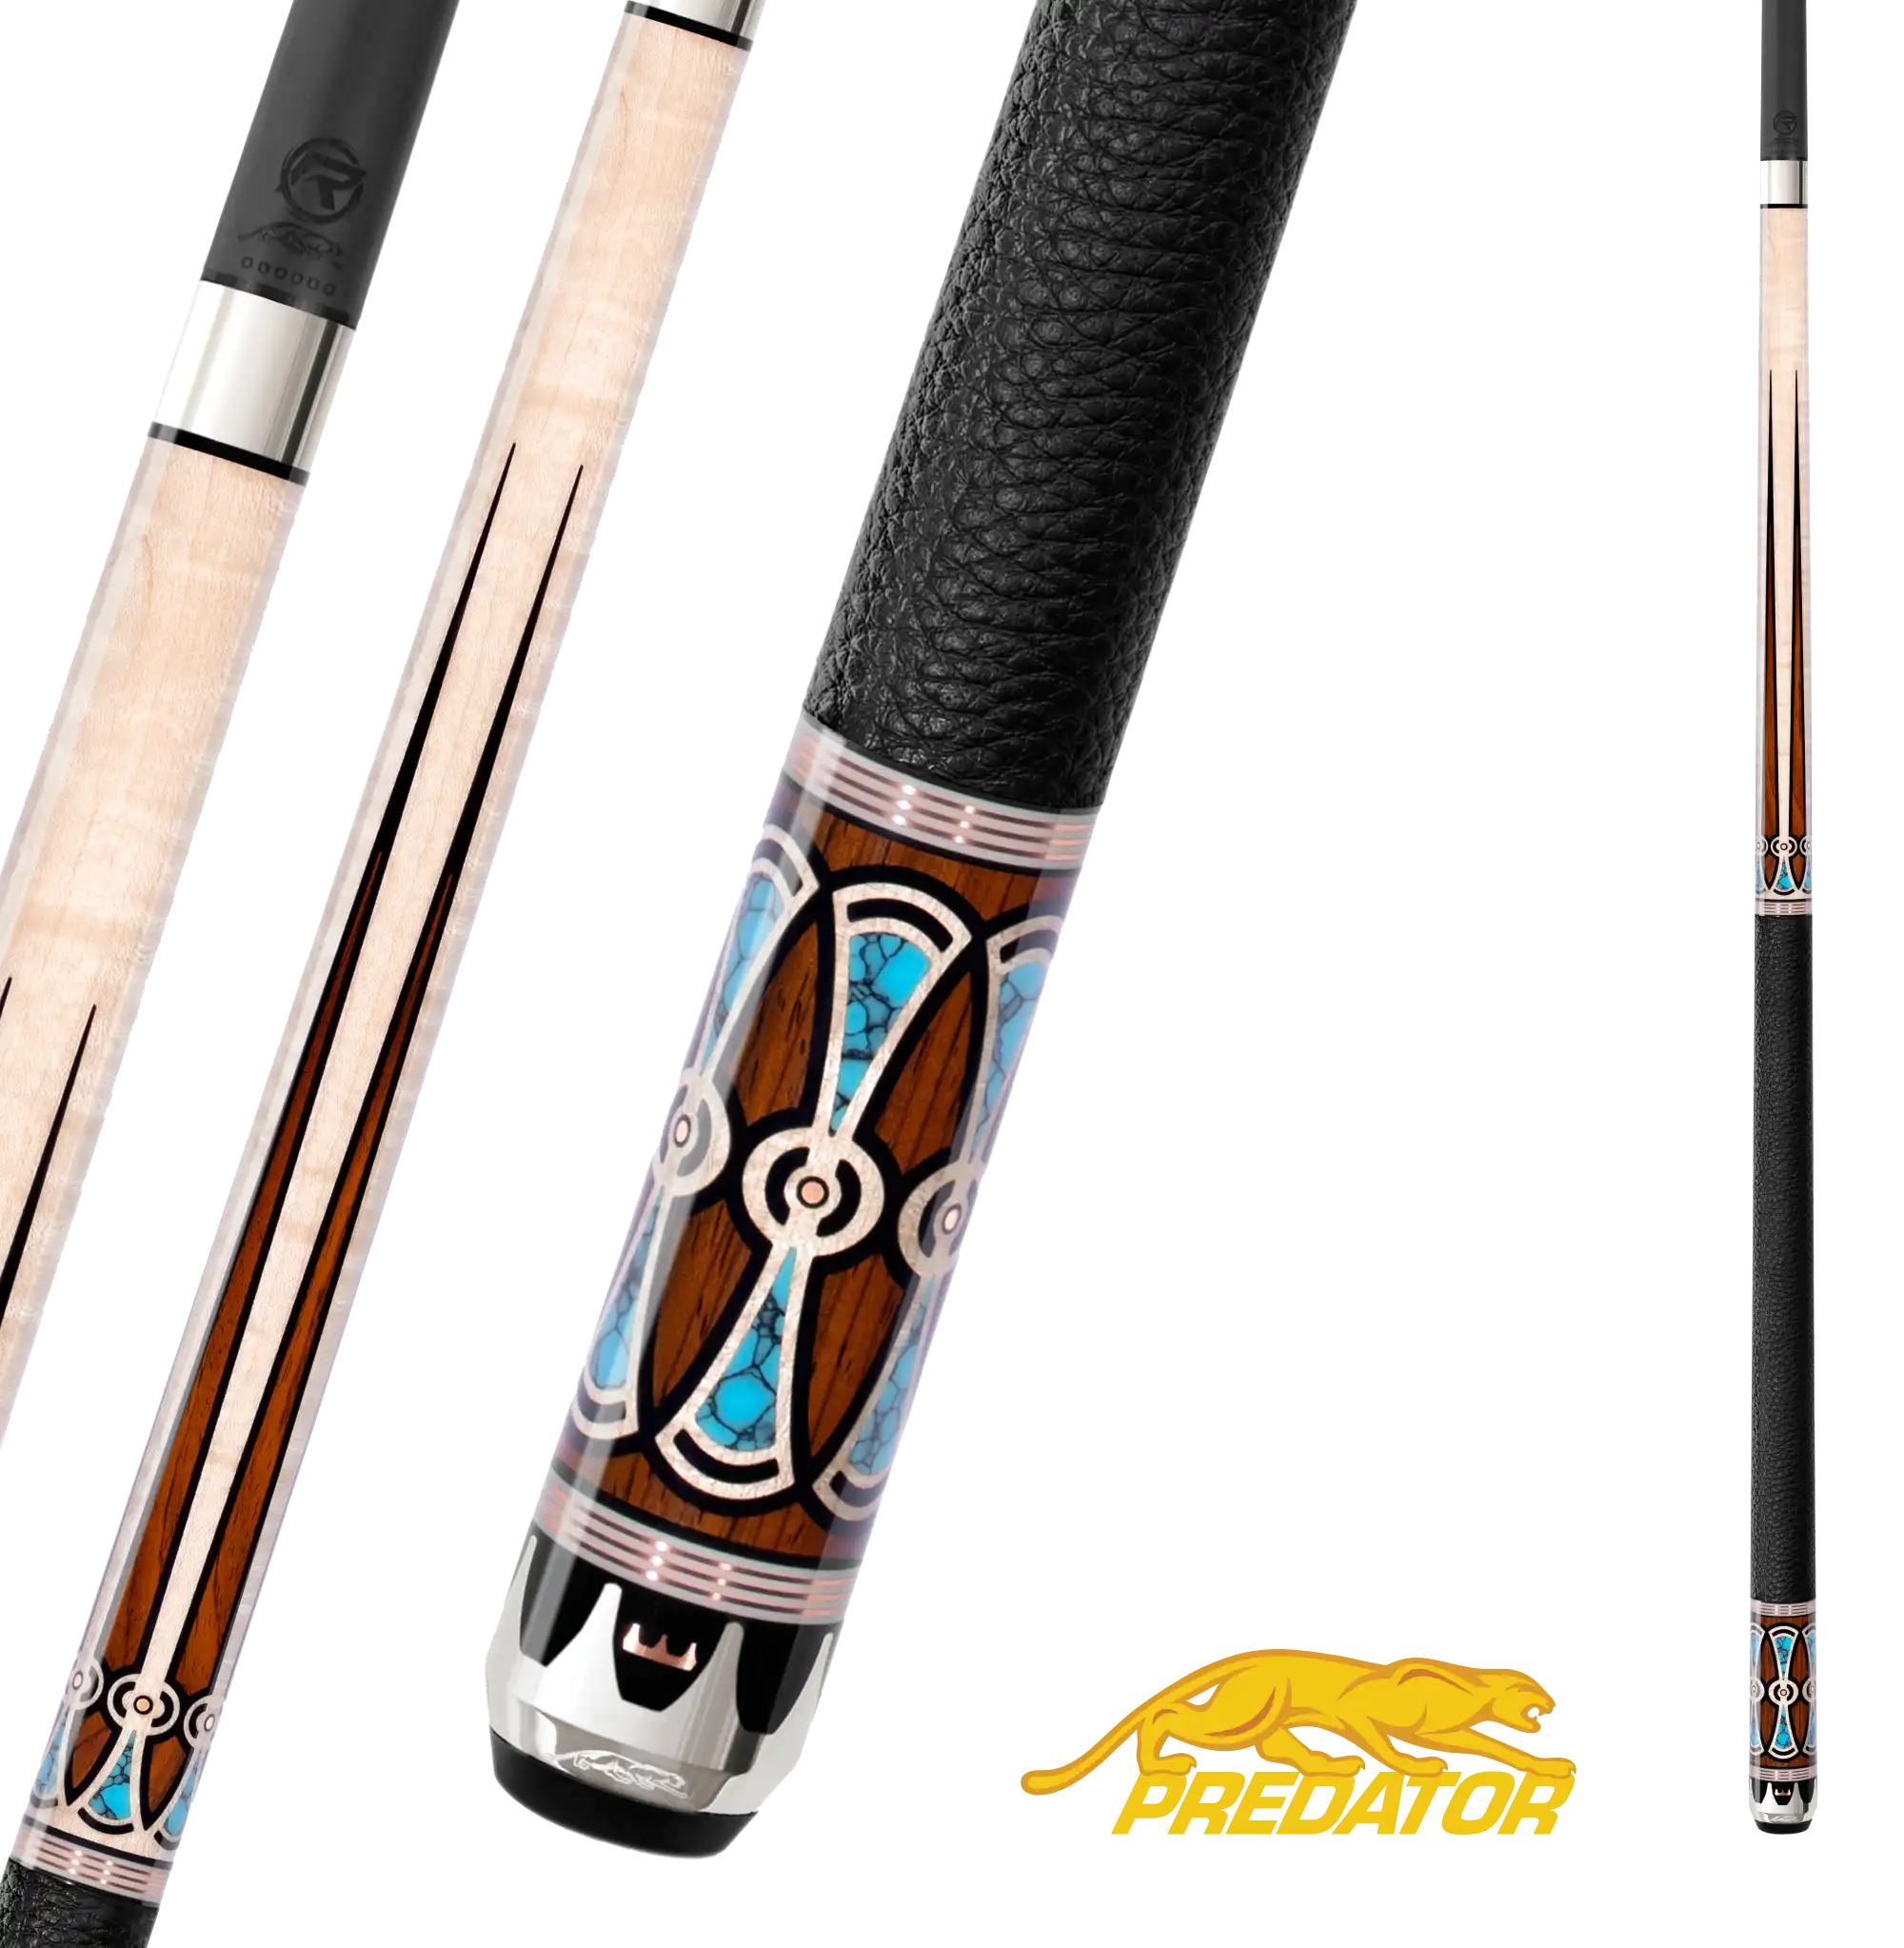 PREDATOR THRONE 3 2 POOL CUE (SHAFT NOT INCLUDED)